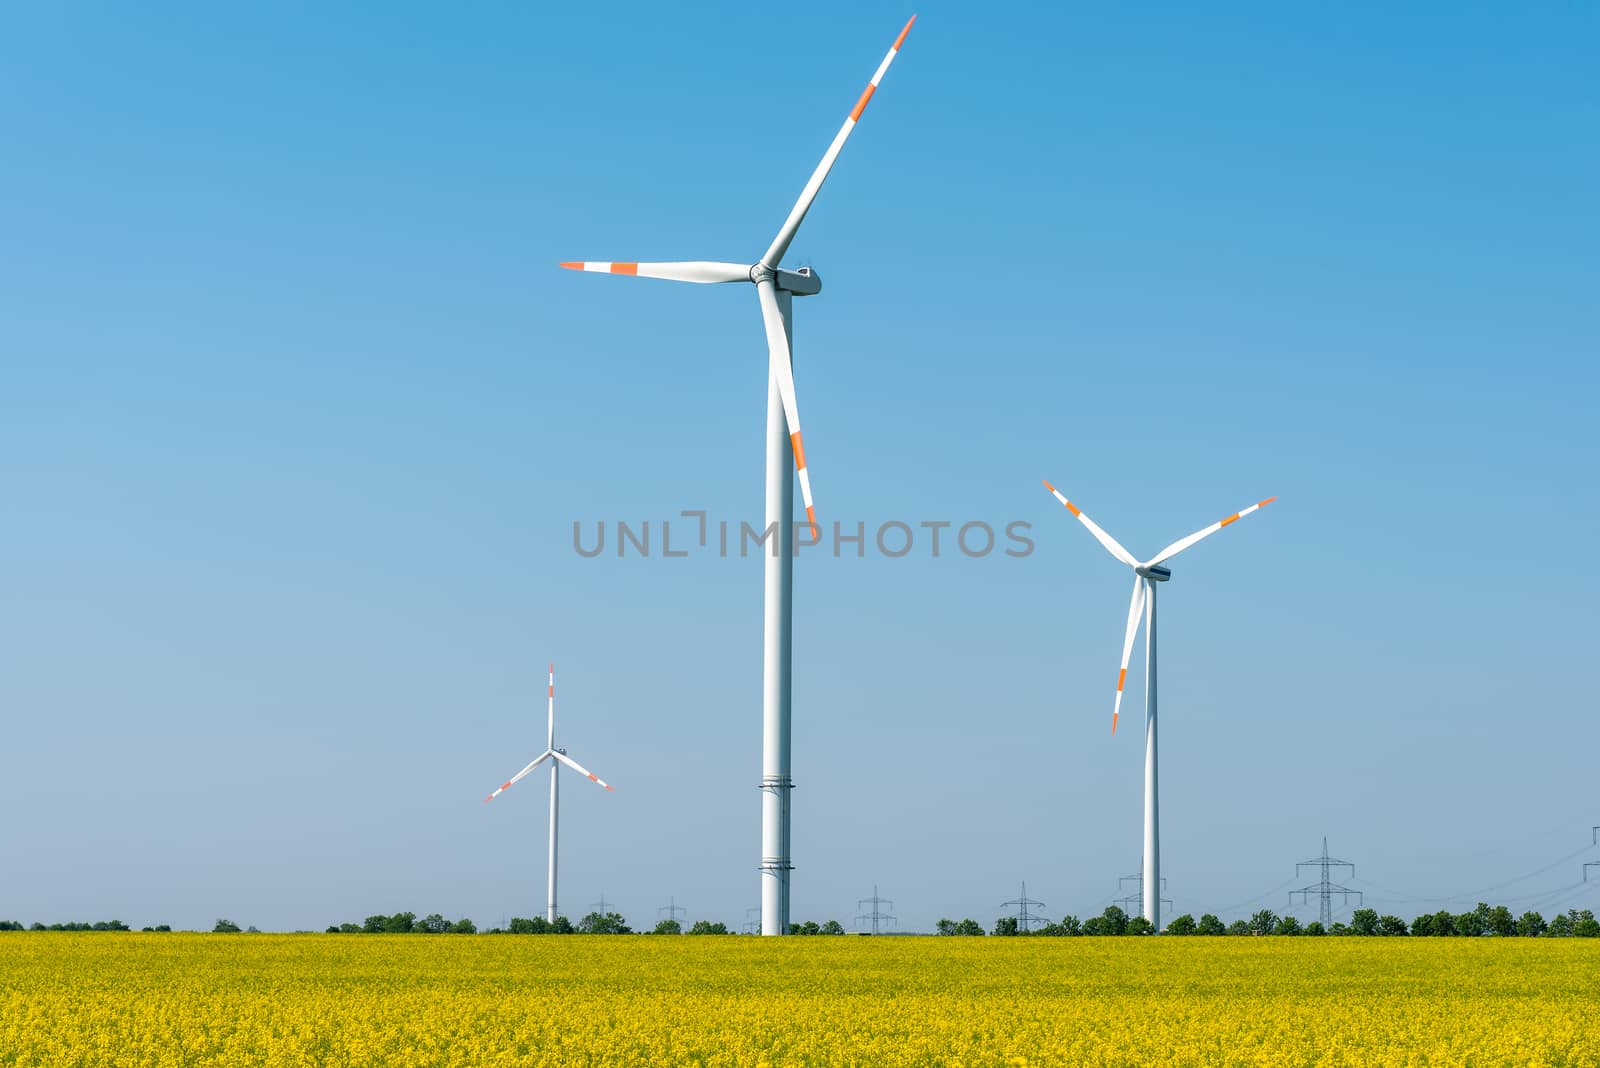 Blooming rapeseed field with wind turbines in the back seen in Germany